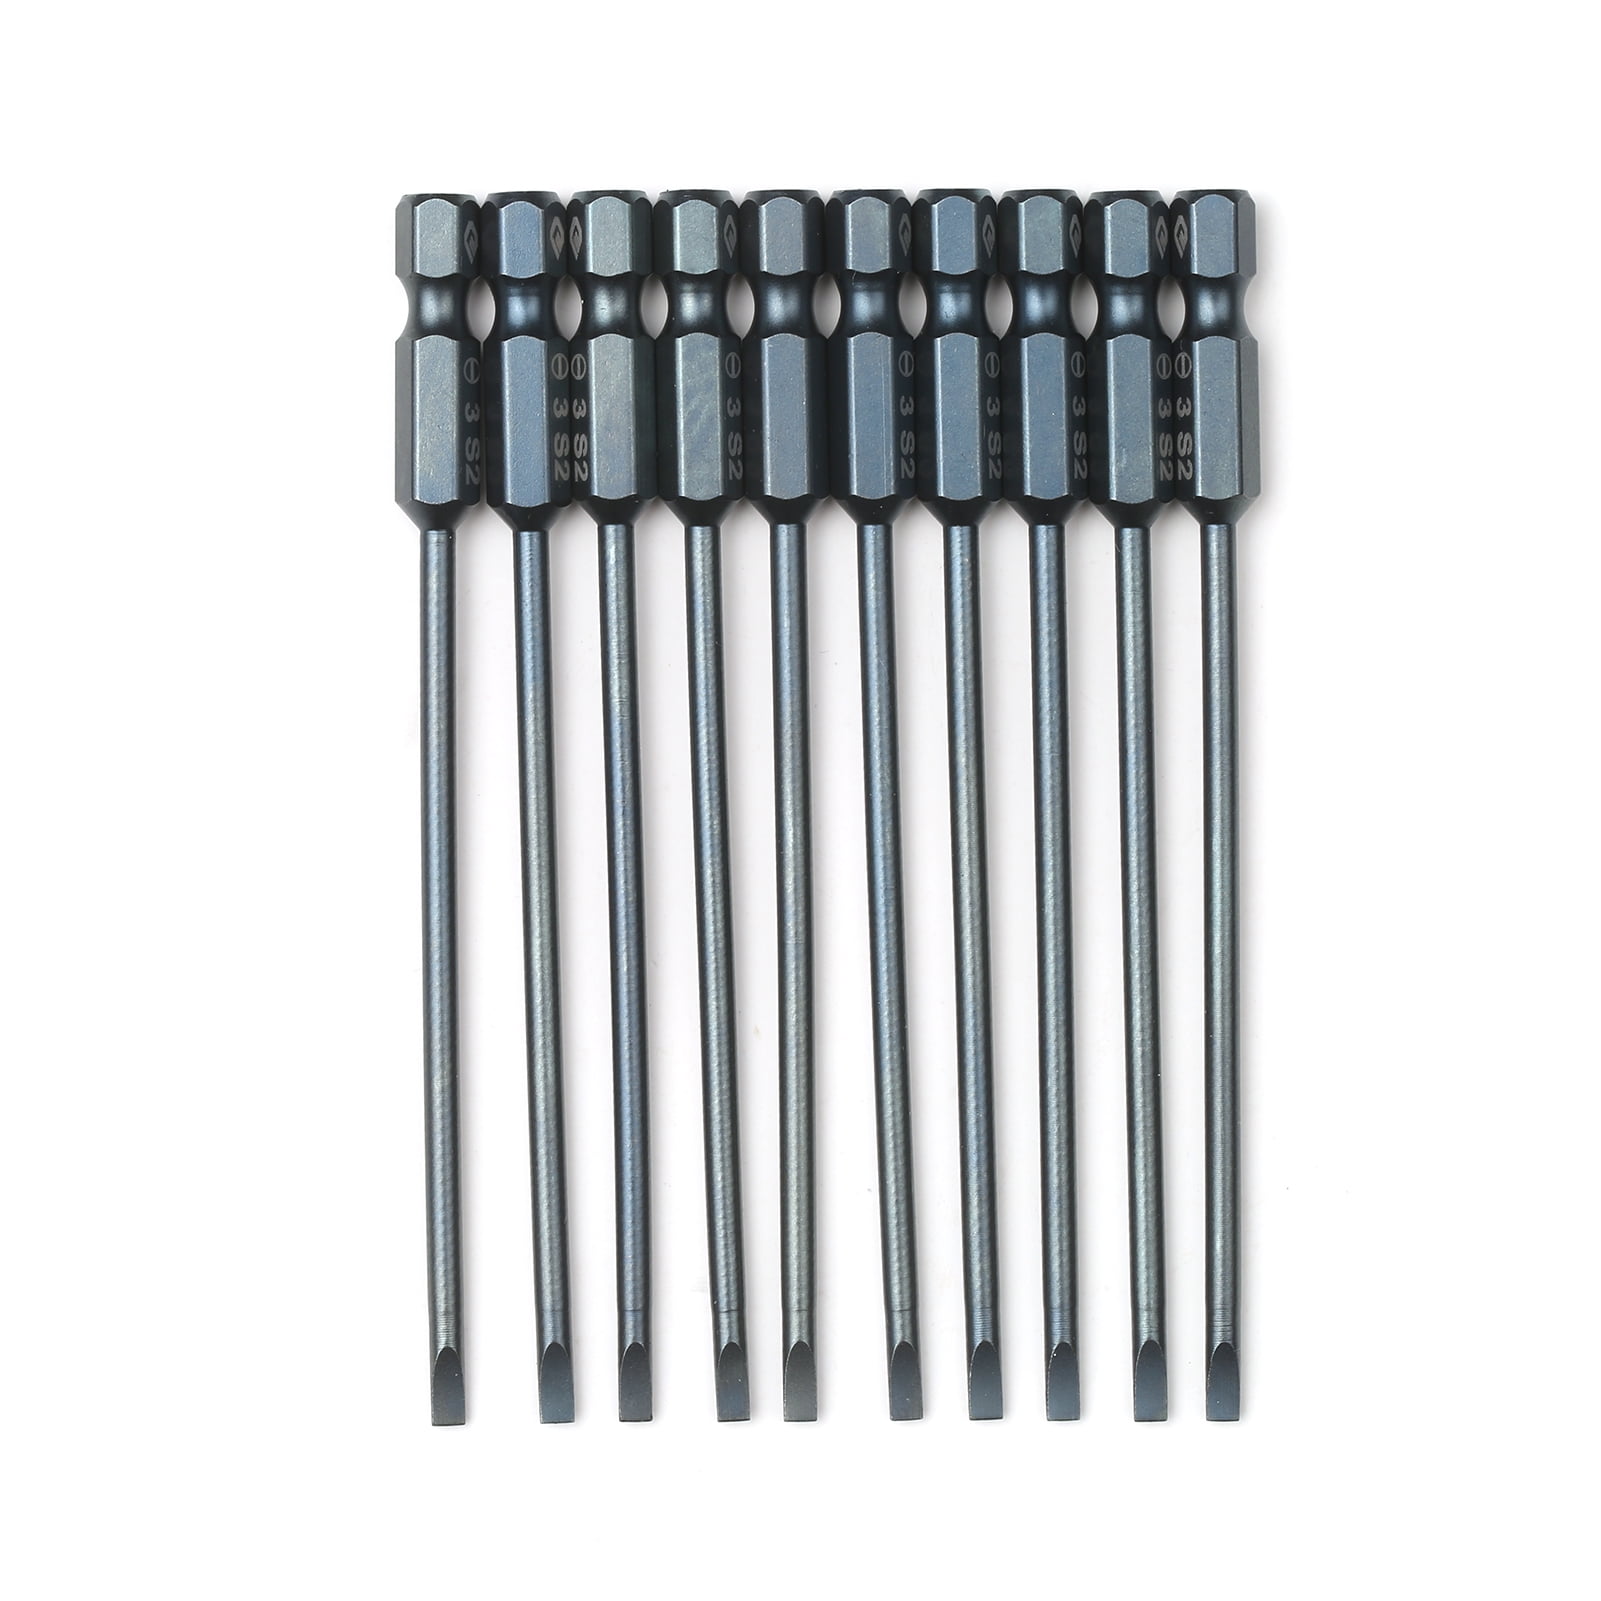 uxcell 5 Pcs 3mm PH1 Magnetic Phillips Screwdriver Bits 1/4 Inch Hex Shank 5.9-inch Length S2 Power Tool 